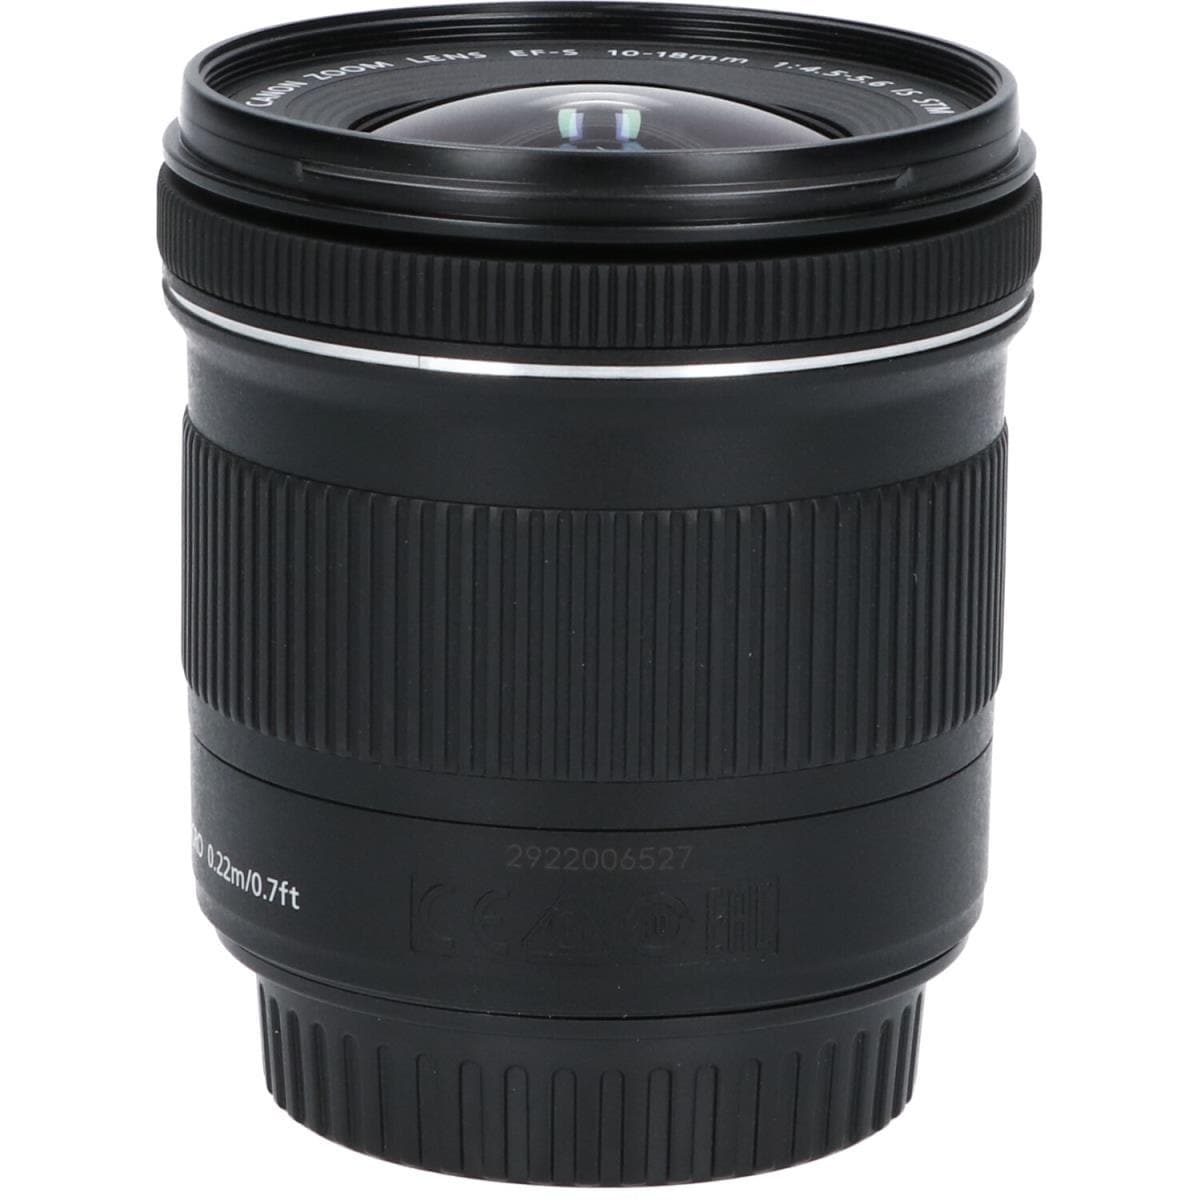 CANON EF-S10-18mm F4.5-5.6IS STM